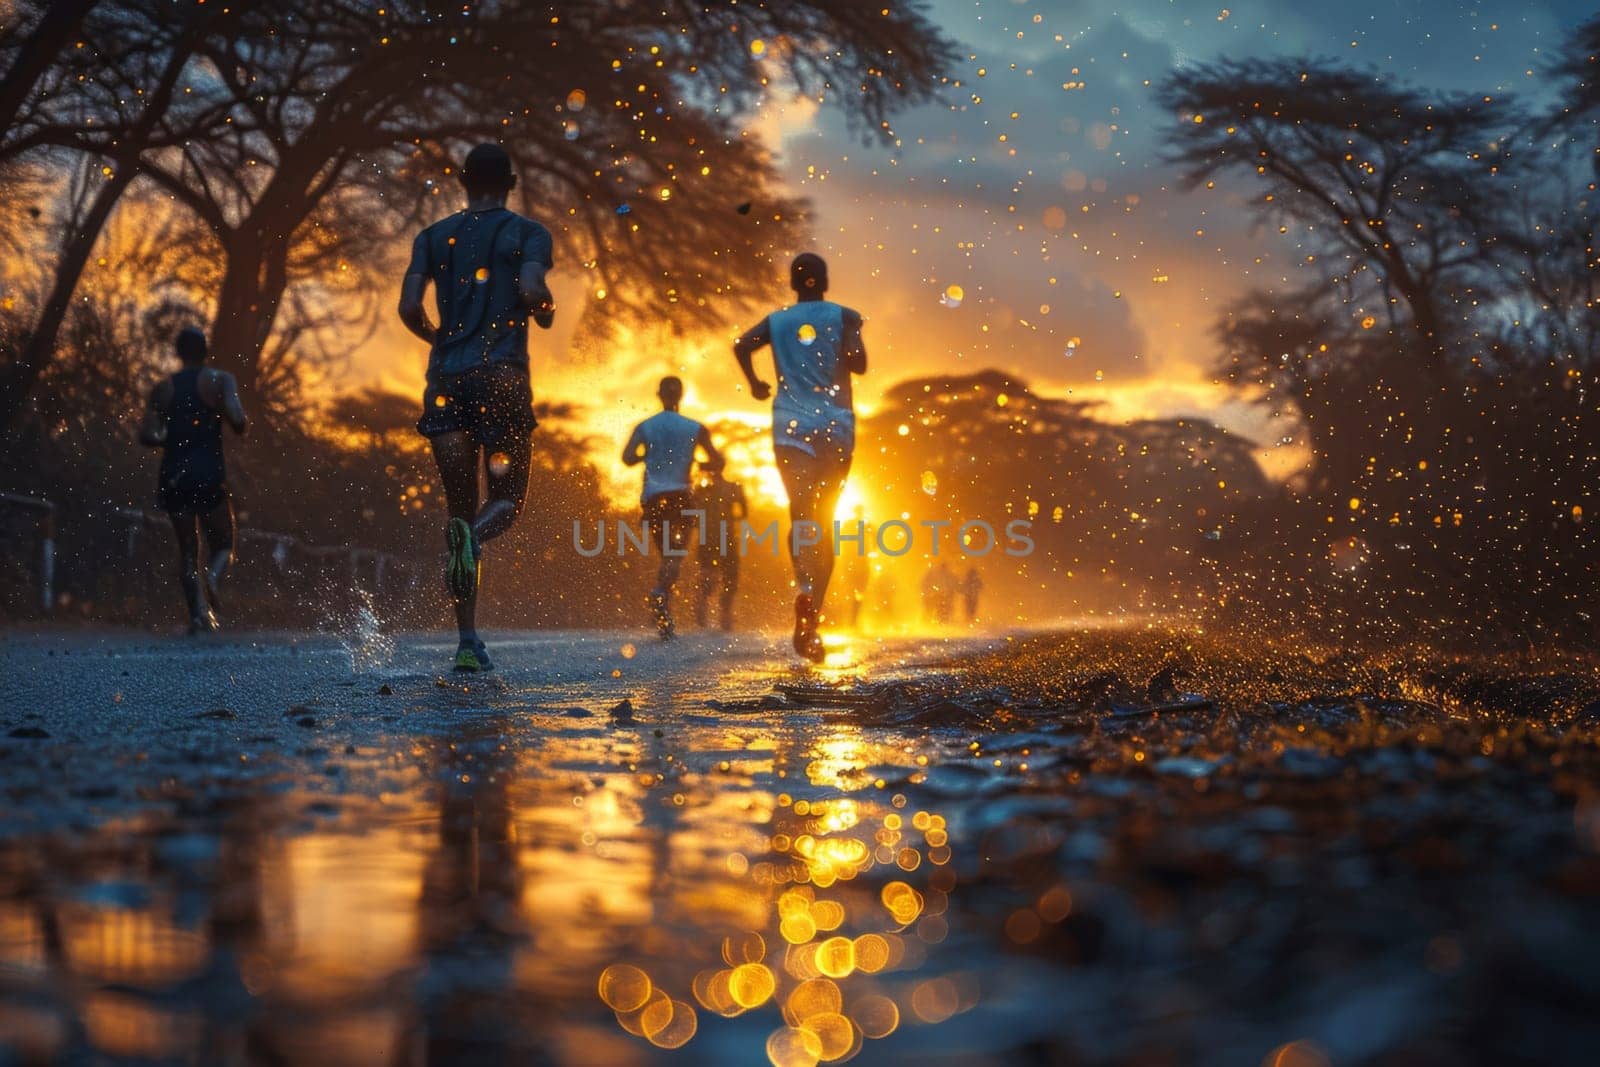 World Running Day. A group of people are running in nature.